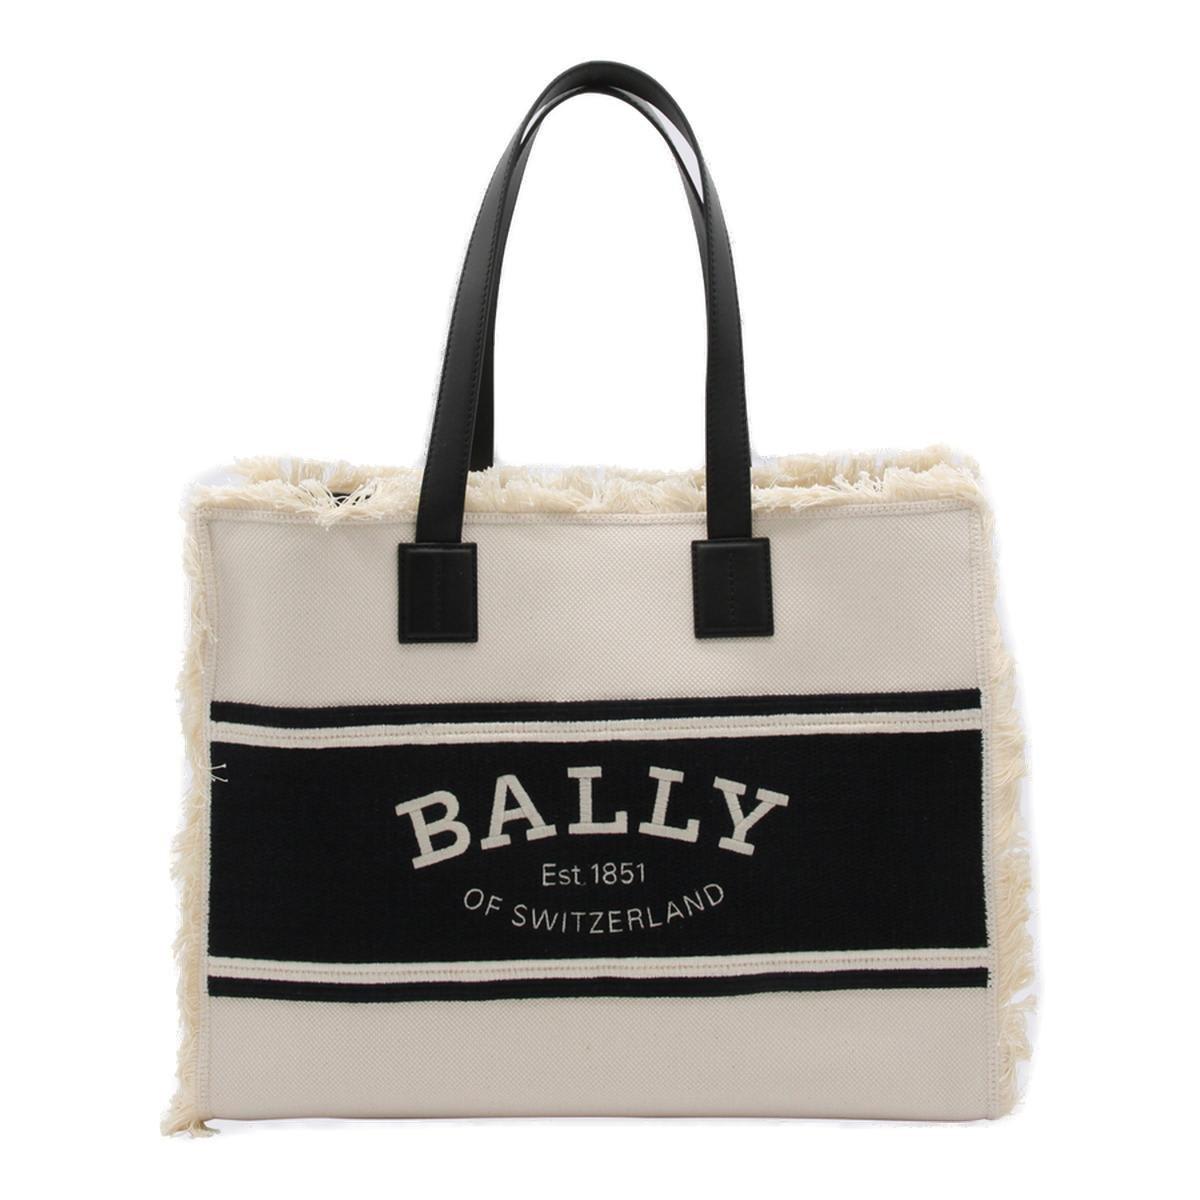 Bally Two-toned Fringed Tote Bag